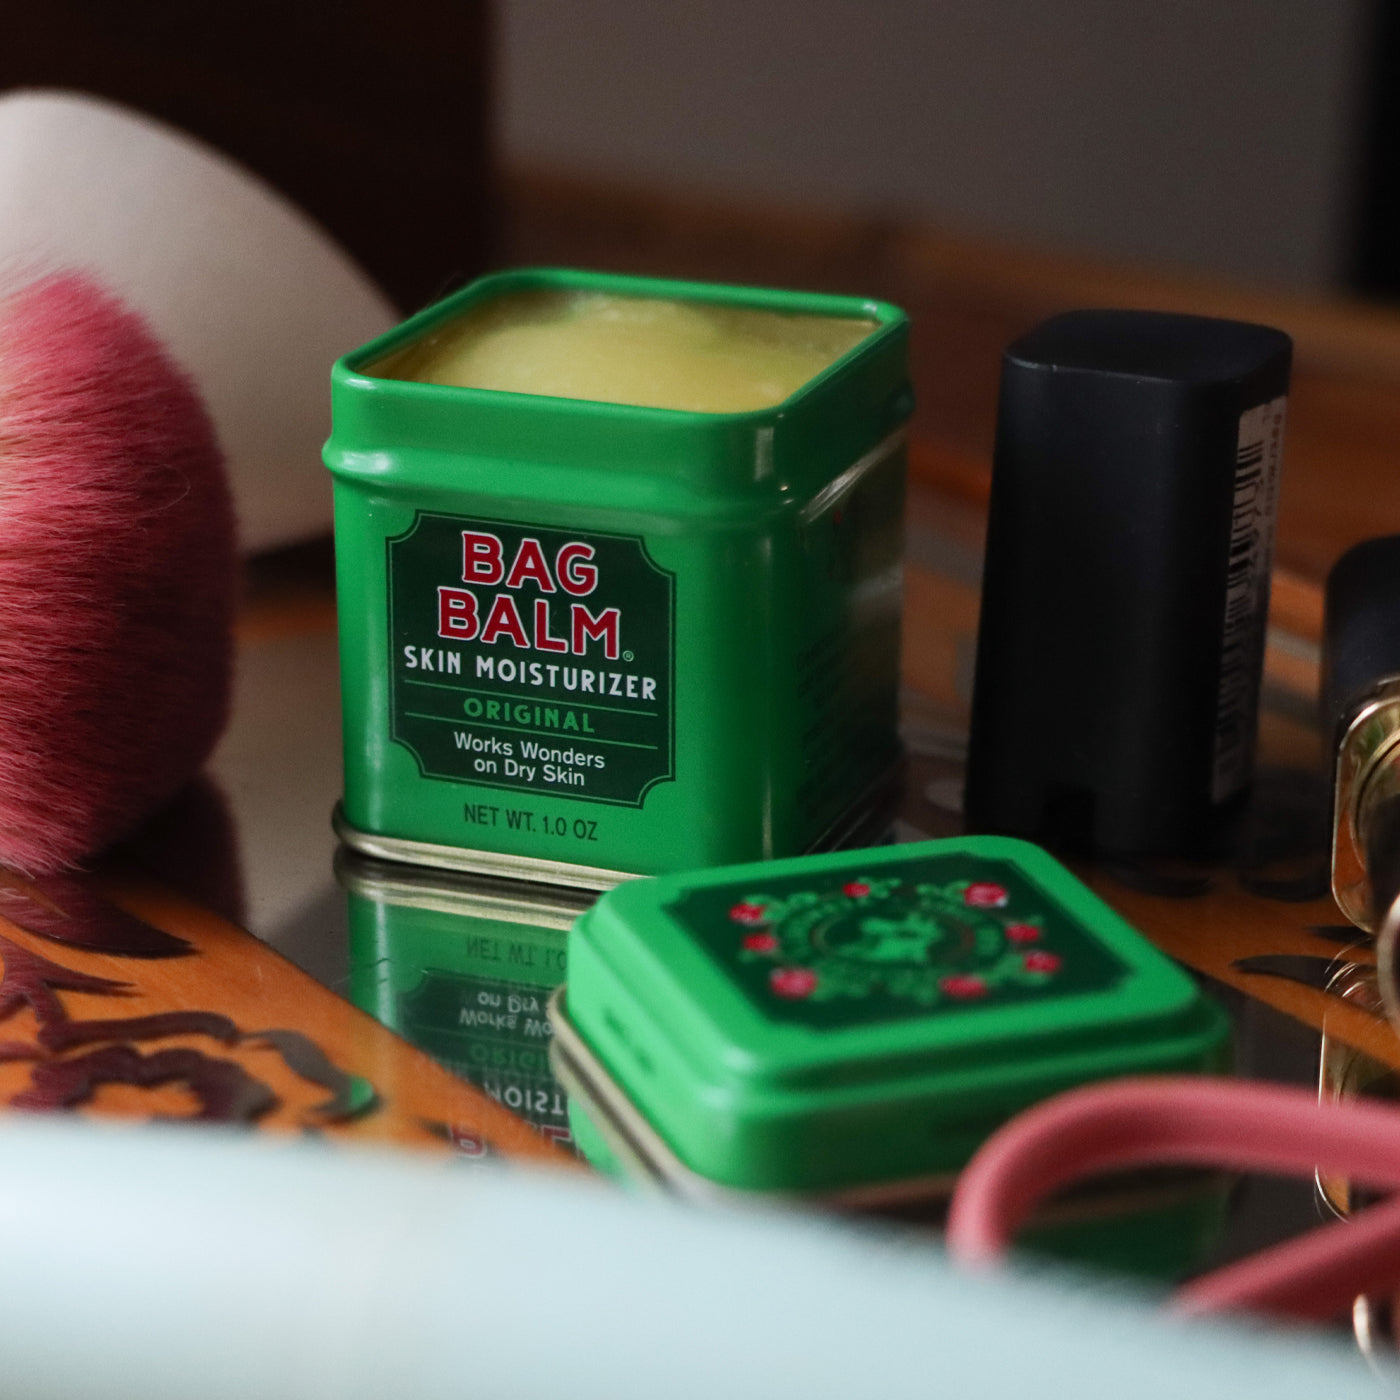 A small, green tin of Bag Balm on a surface